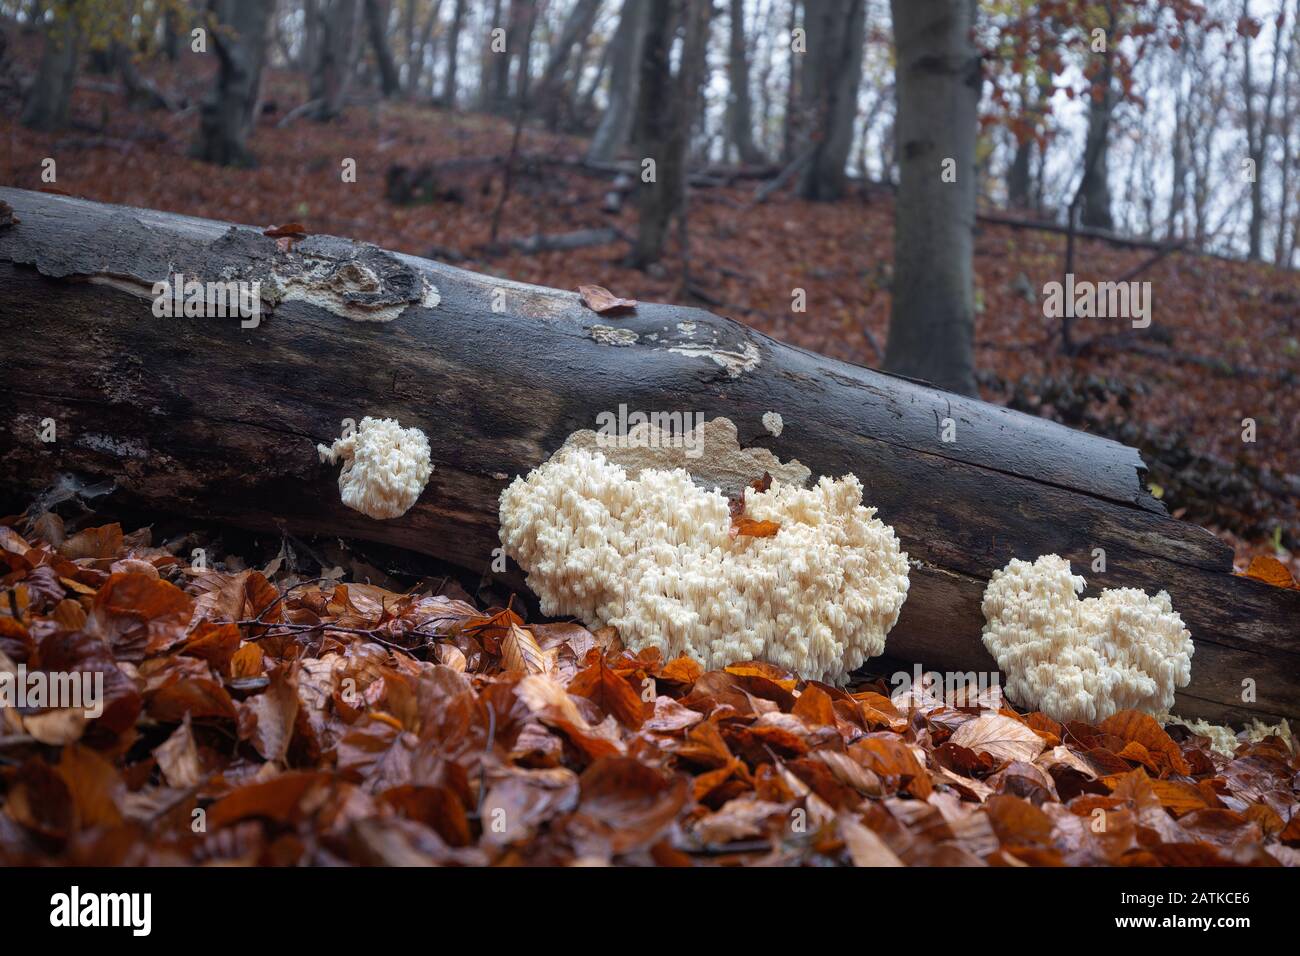 Edible mushrooms of unusual shape that grow on a tree trunk Stock Photo